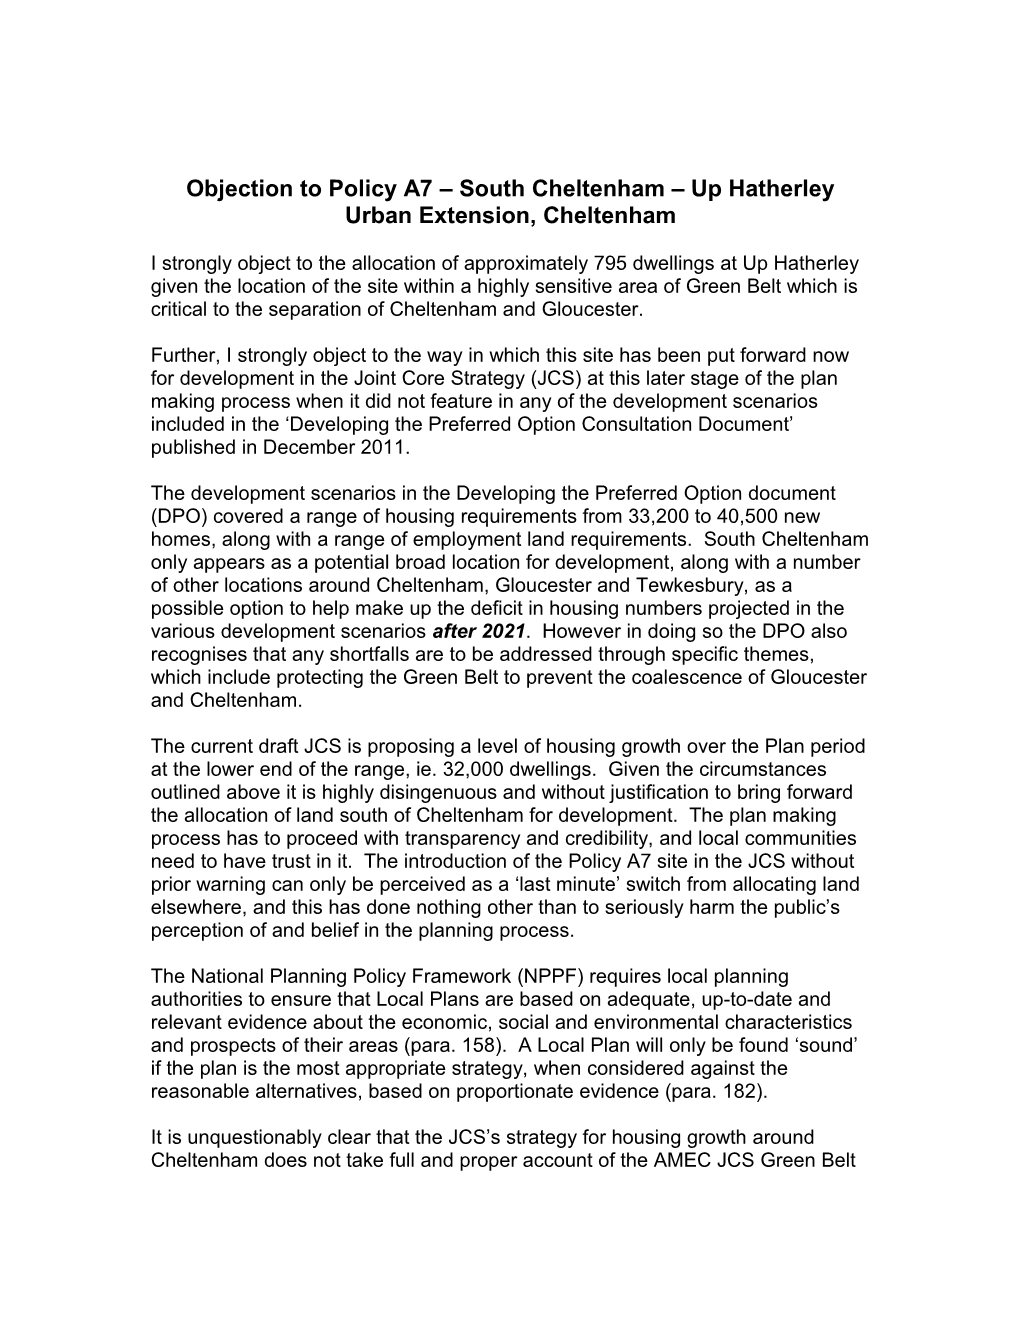 Objection to Policy A7 South Cheltenham up Hatherley Urban Extension, Cheltenham